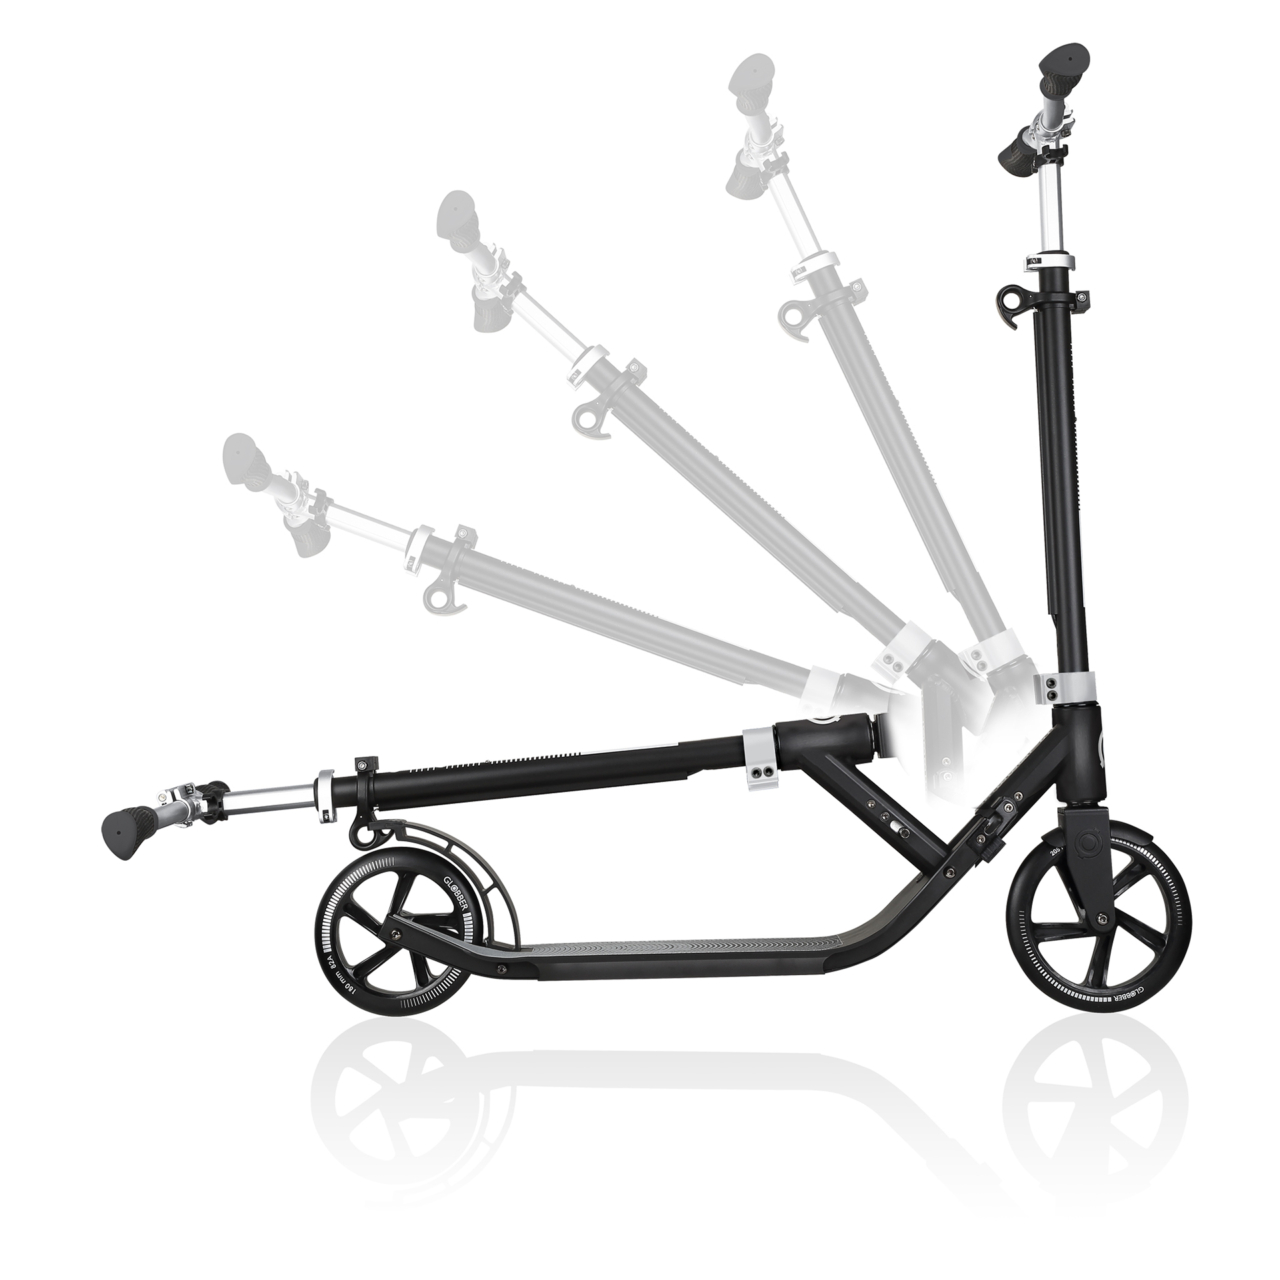 474 102 Folding Scooter For Teens